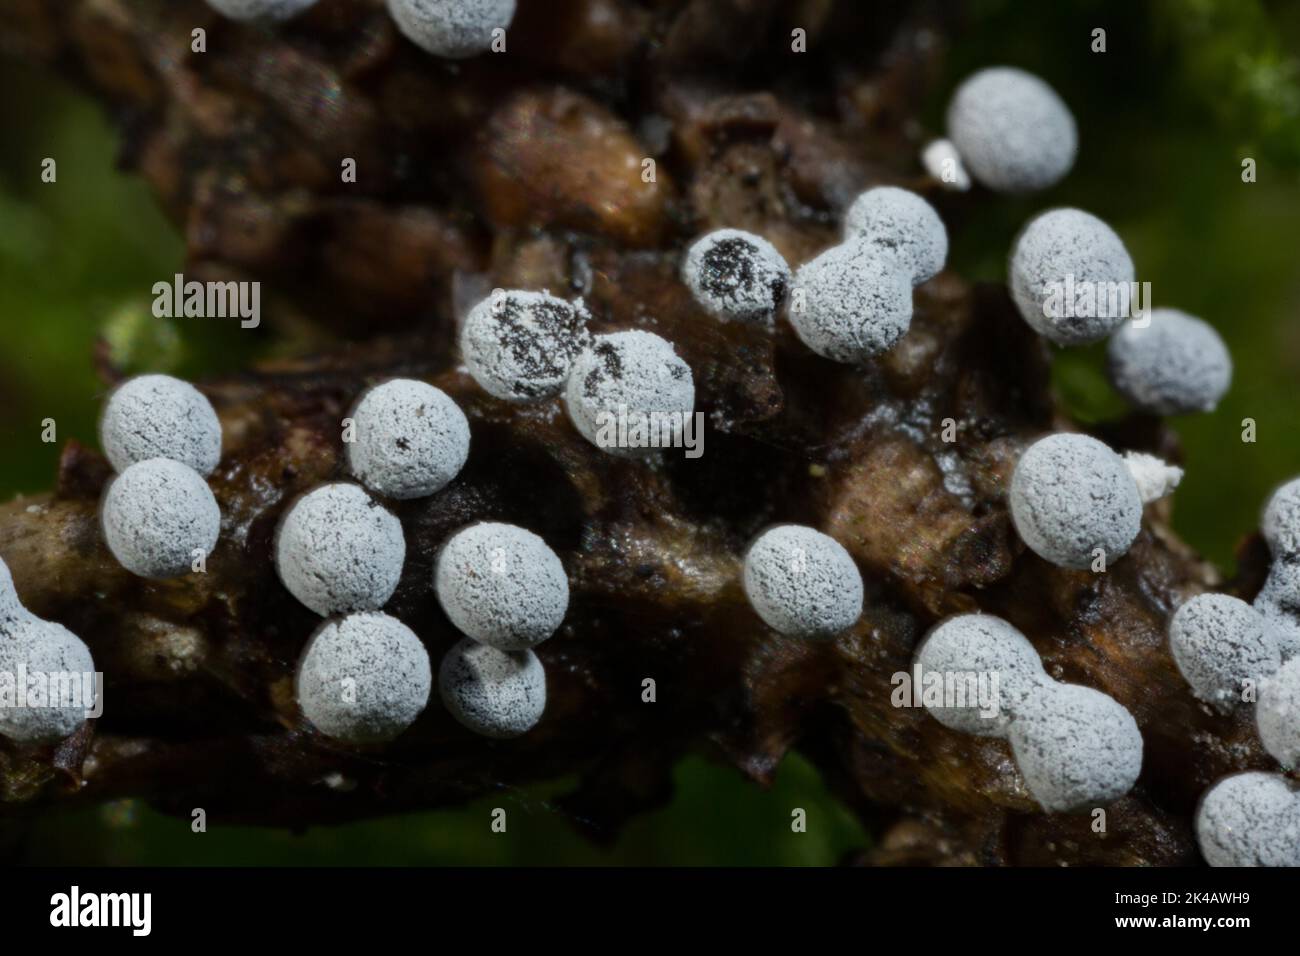 Grey globe slime mould several spherical greyish fruiting bodies next to each other on branches Stock Photo